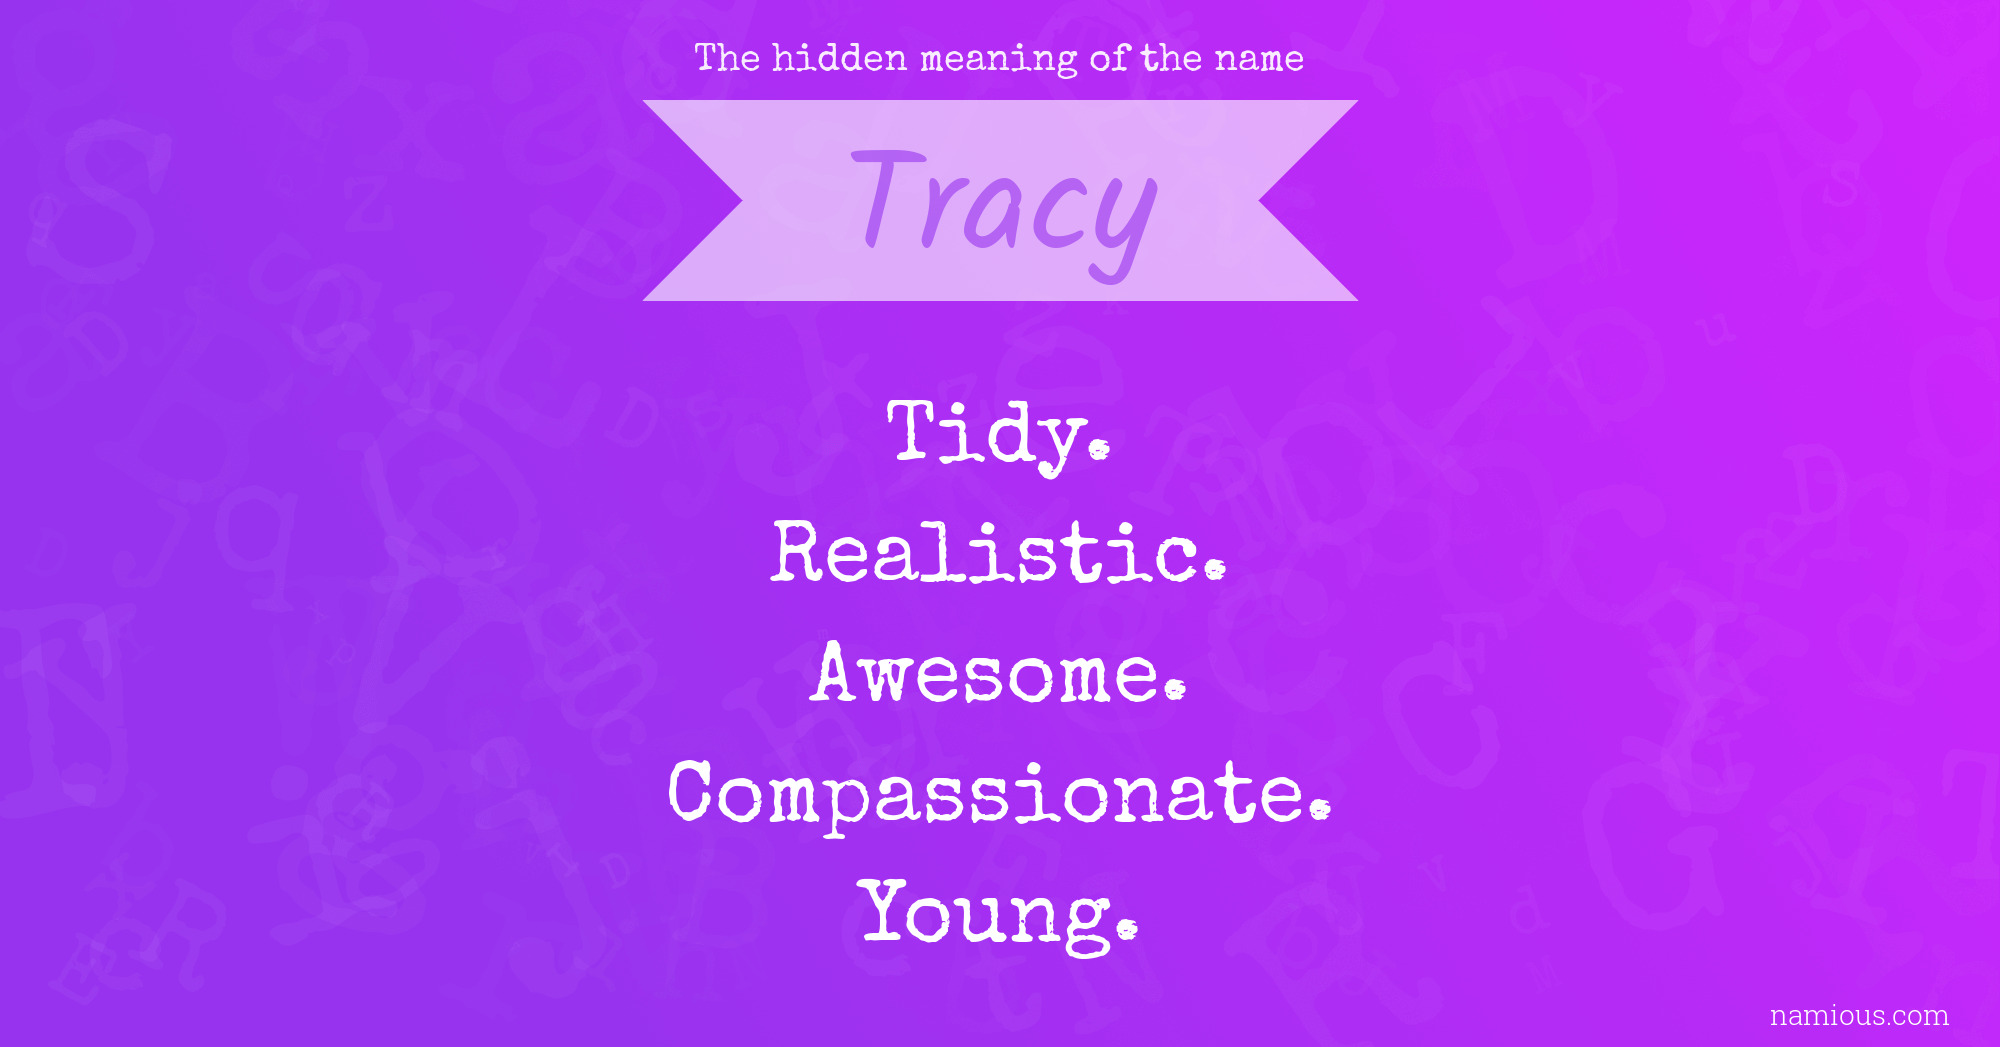 The hidden meaning of the name Tracy